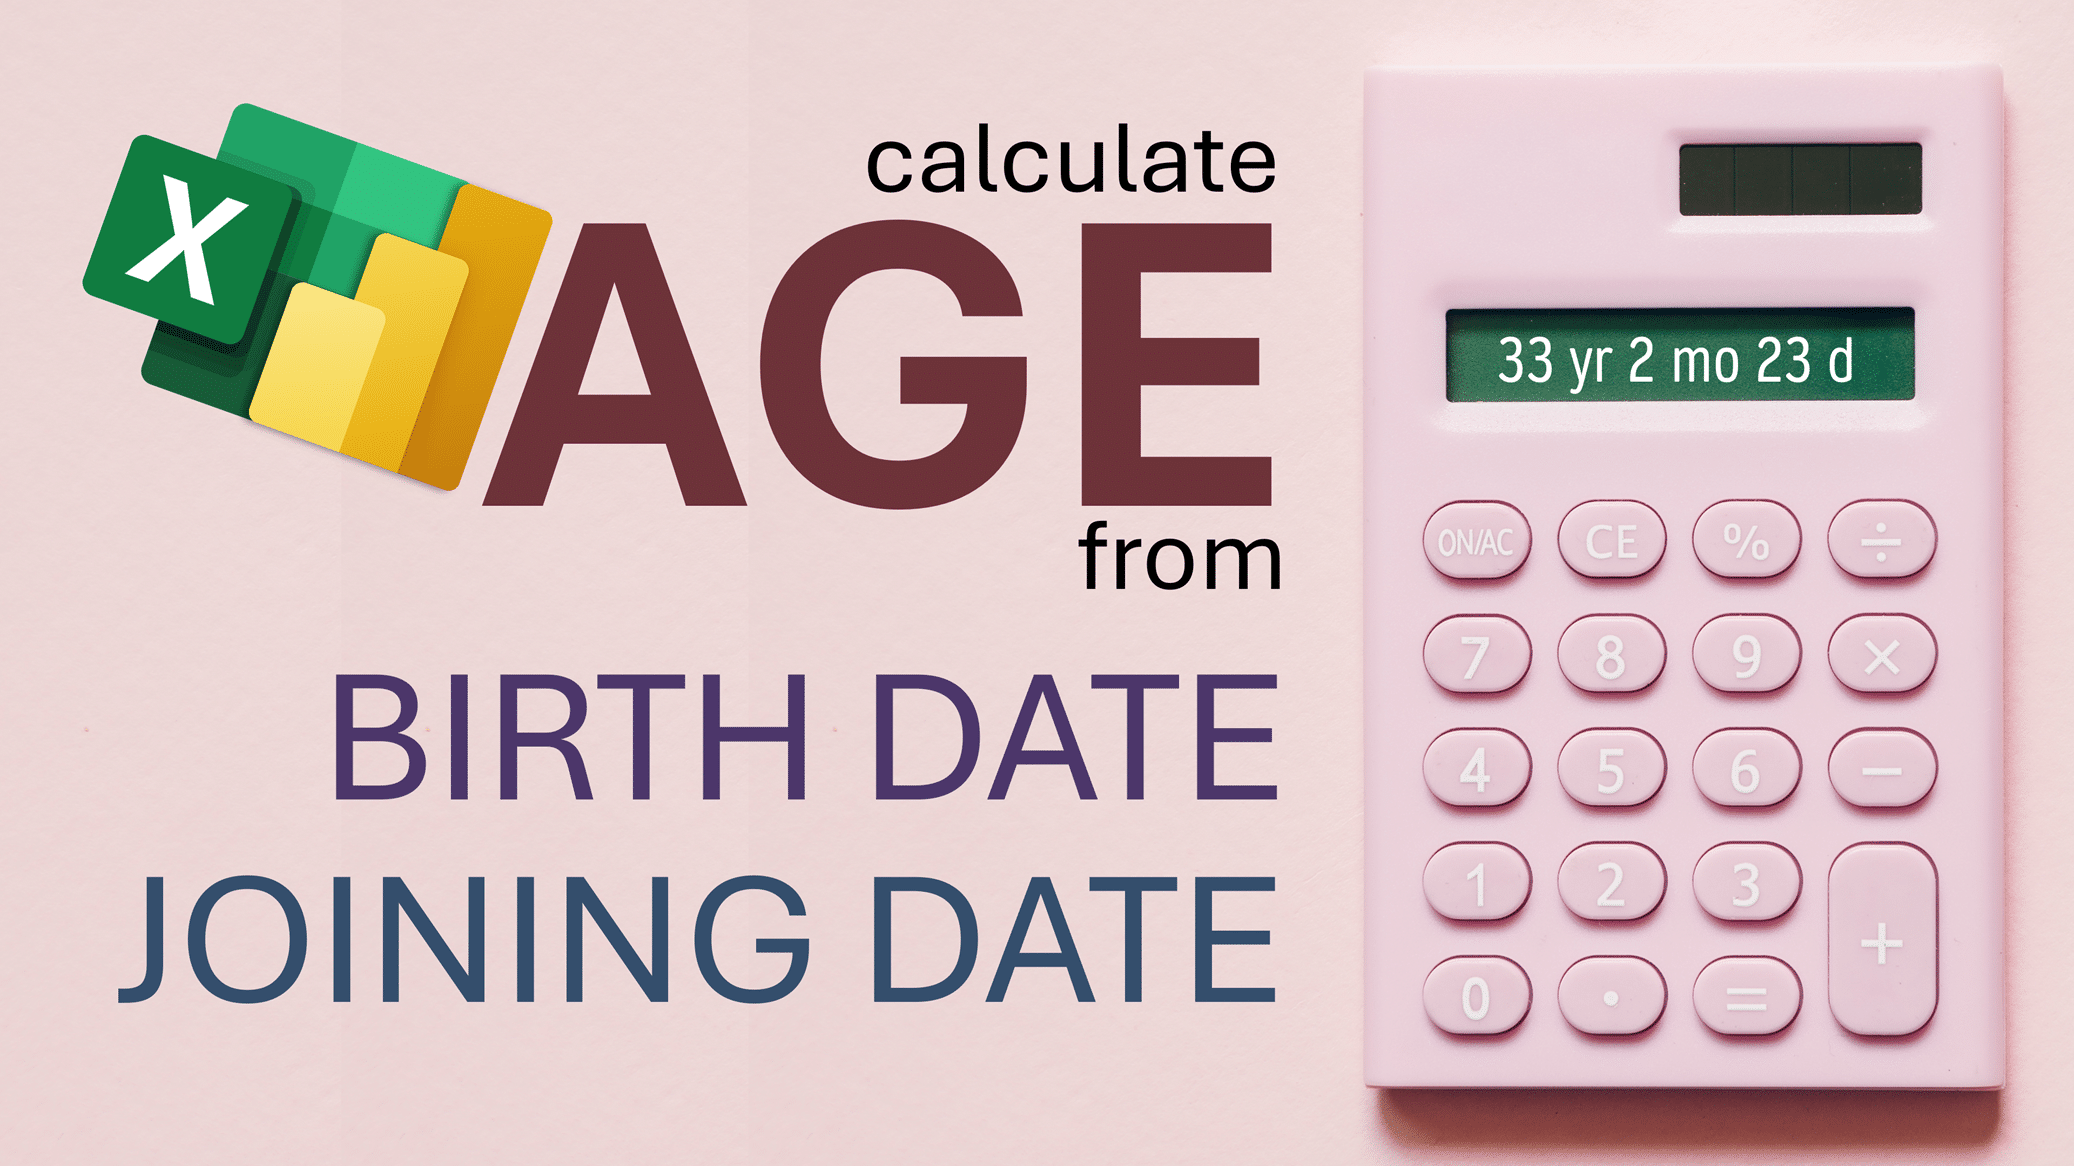 Calculate age from birth date or joining date